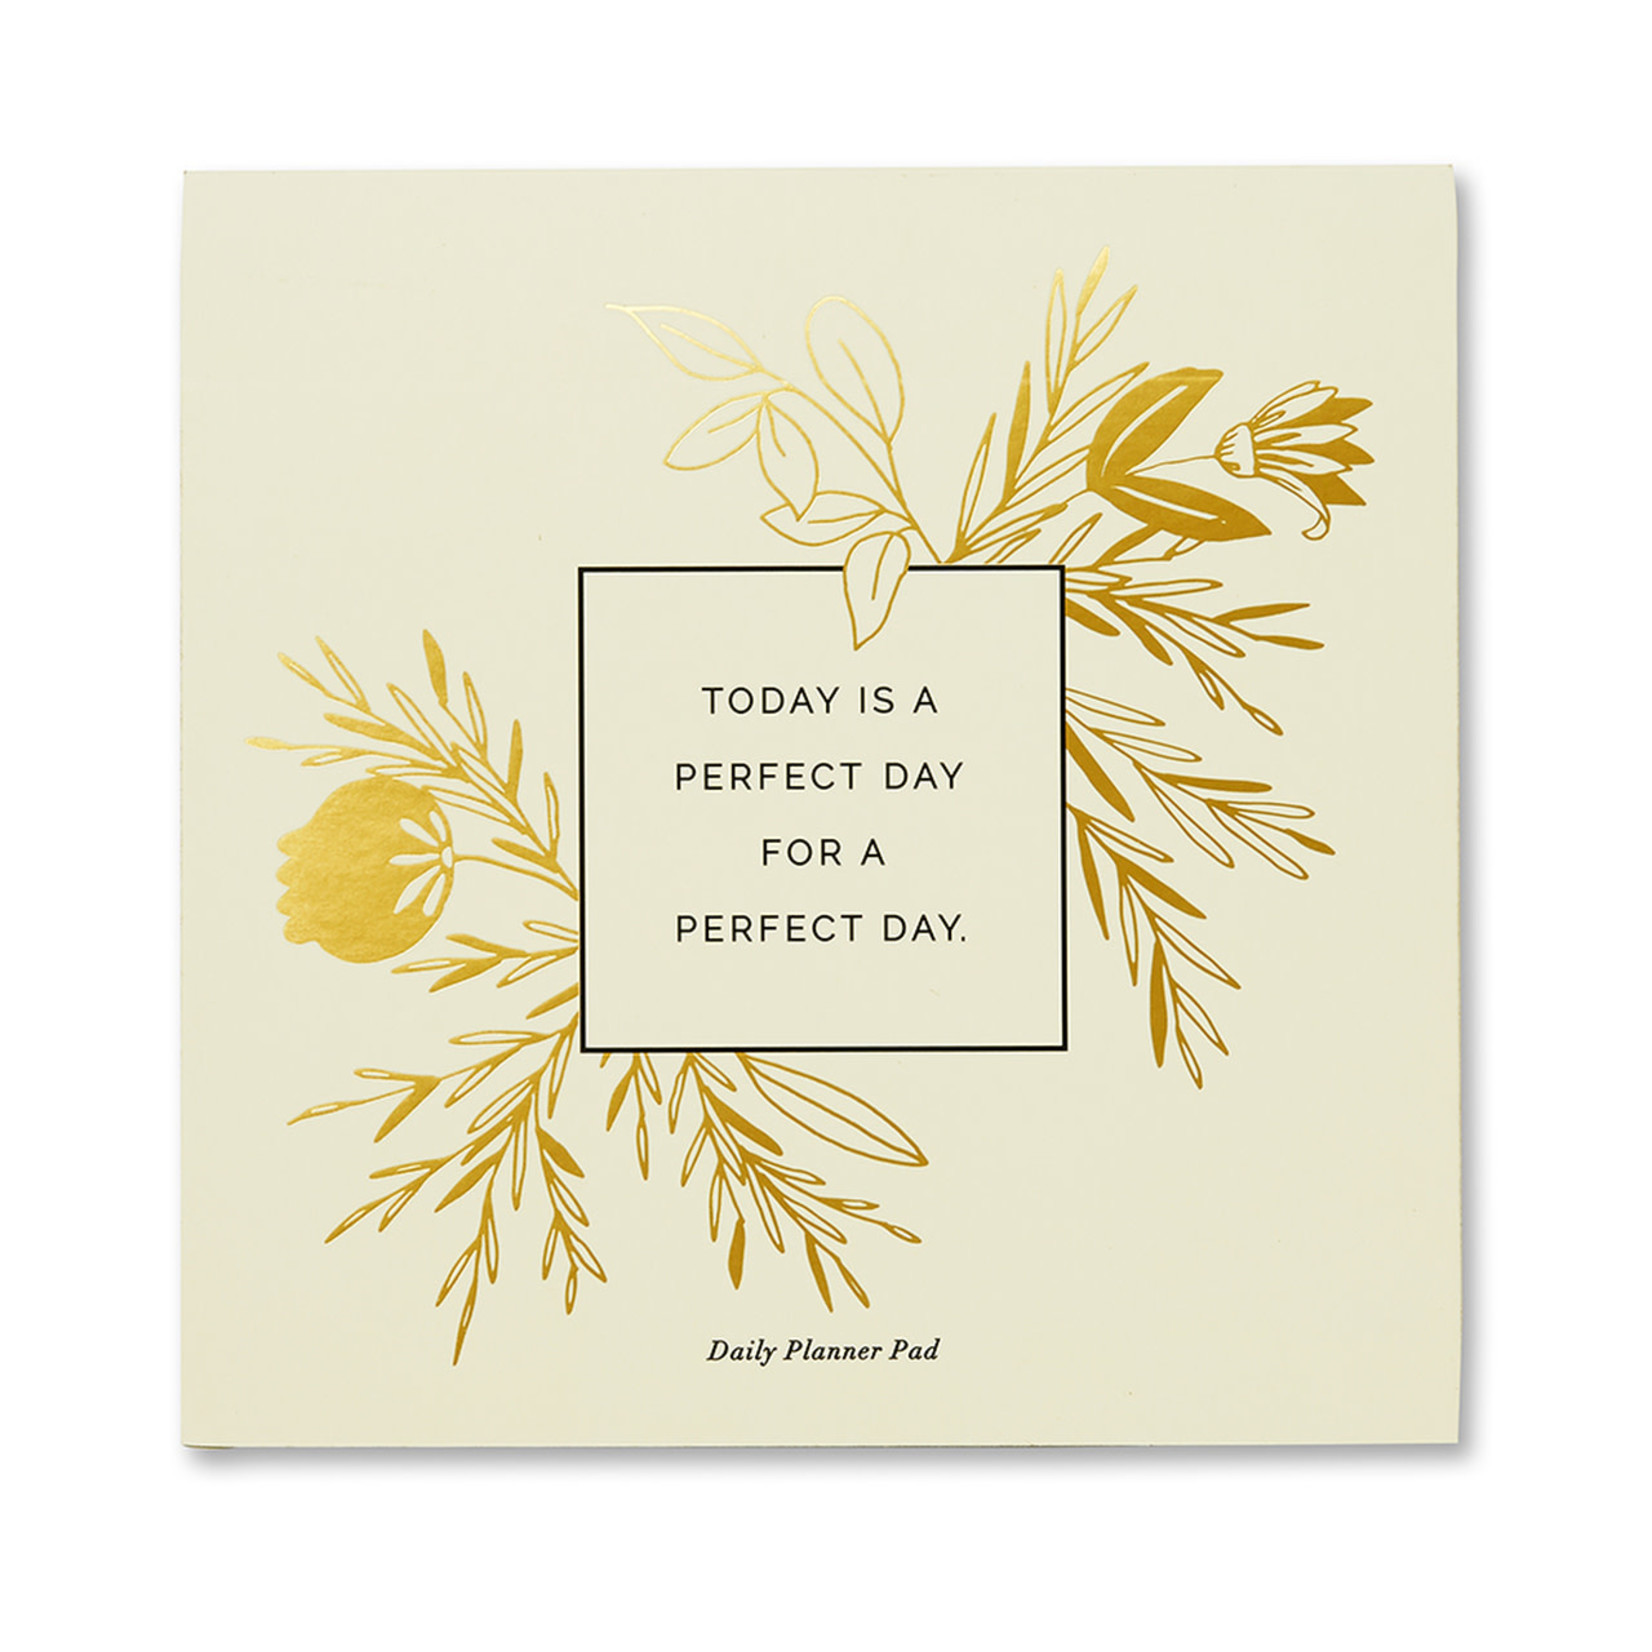 COMPENDIUM DAILY PLANNER PAD - TODAY IS A PERFECT DAY FOR A PERFECT DAY